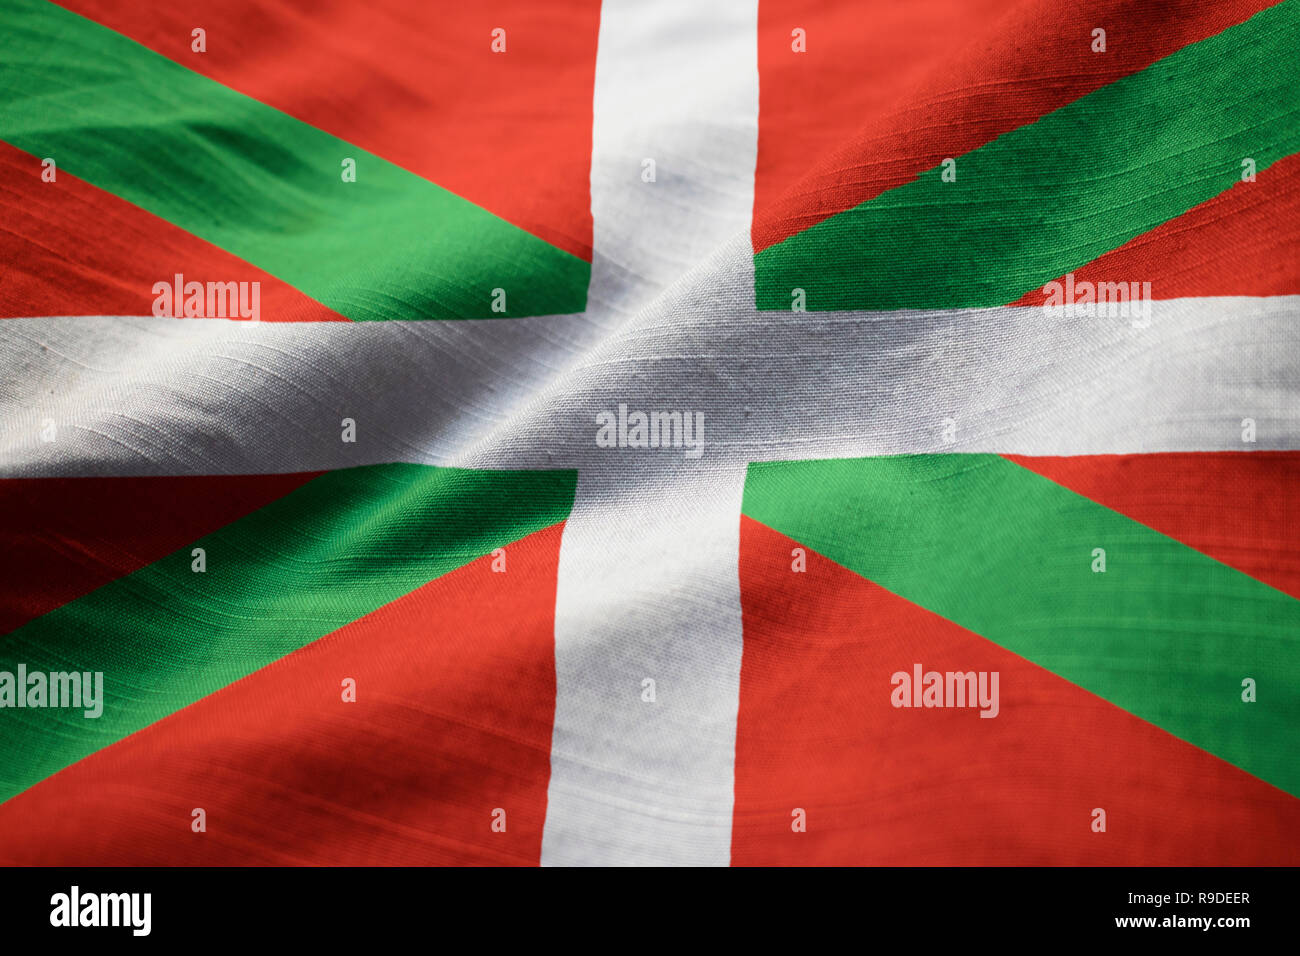 Closeup of Ruffled Basque Country Flag, Basque Country Flag Blowing in Wind Stock Photo